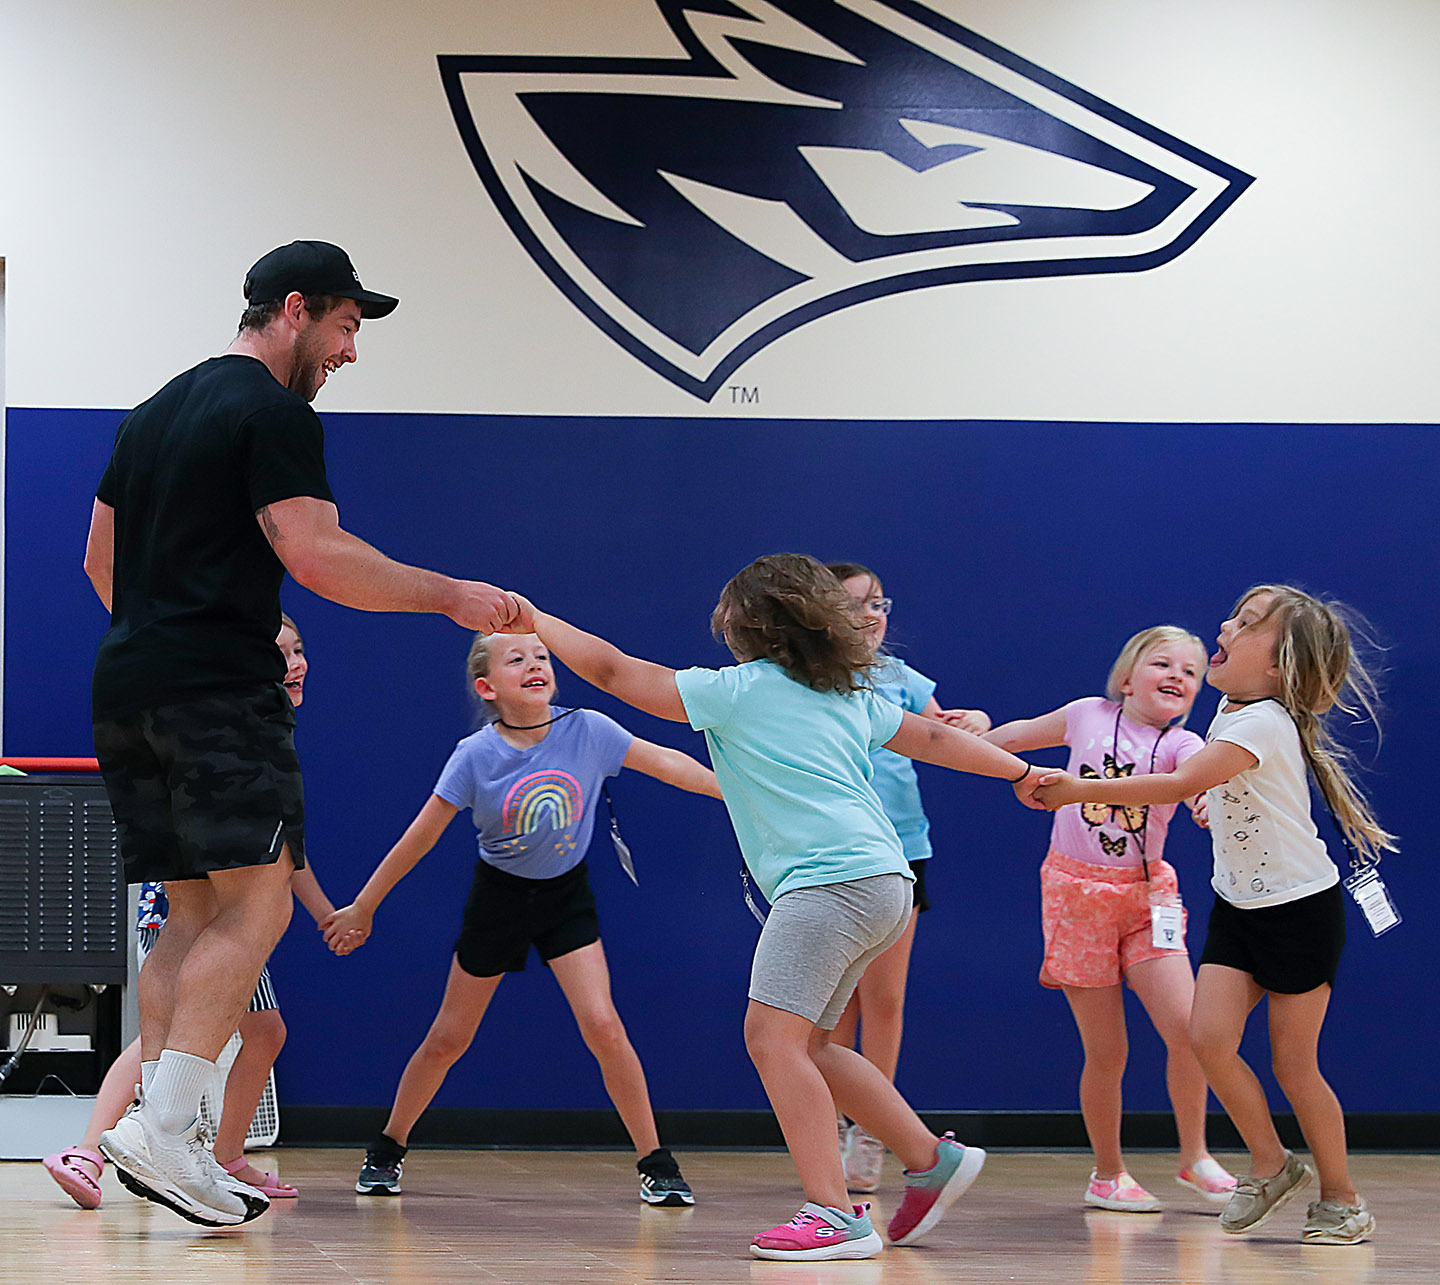 Bryant Isaacs works with children last summer during a PAWS University cheer camp at UNK. (Photo by Erika Pritchard, UNK Communications)